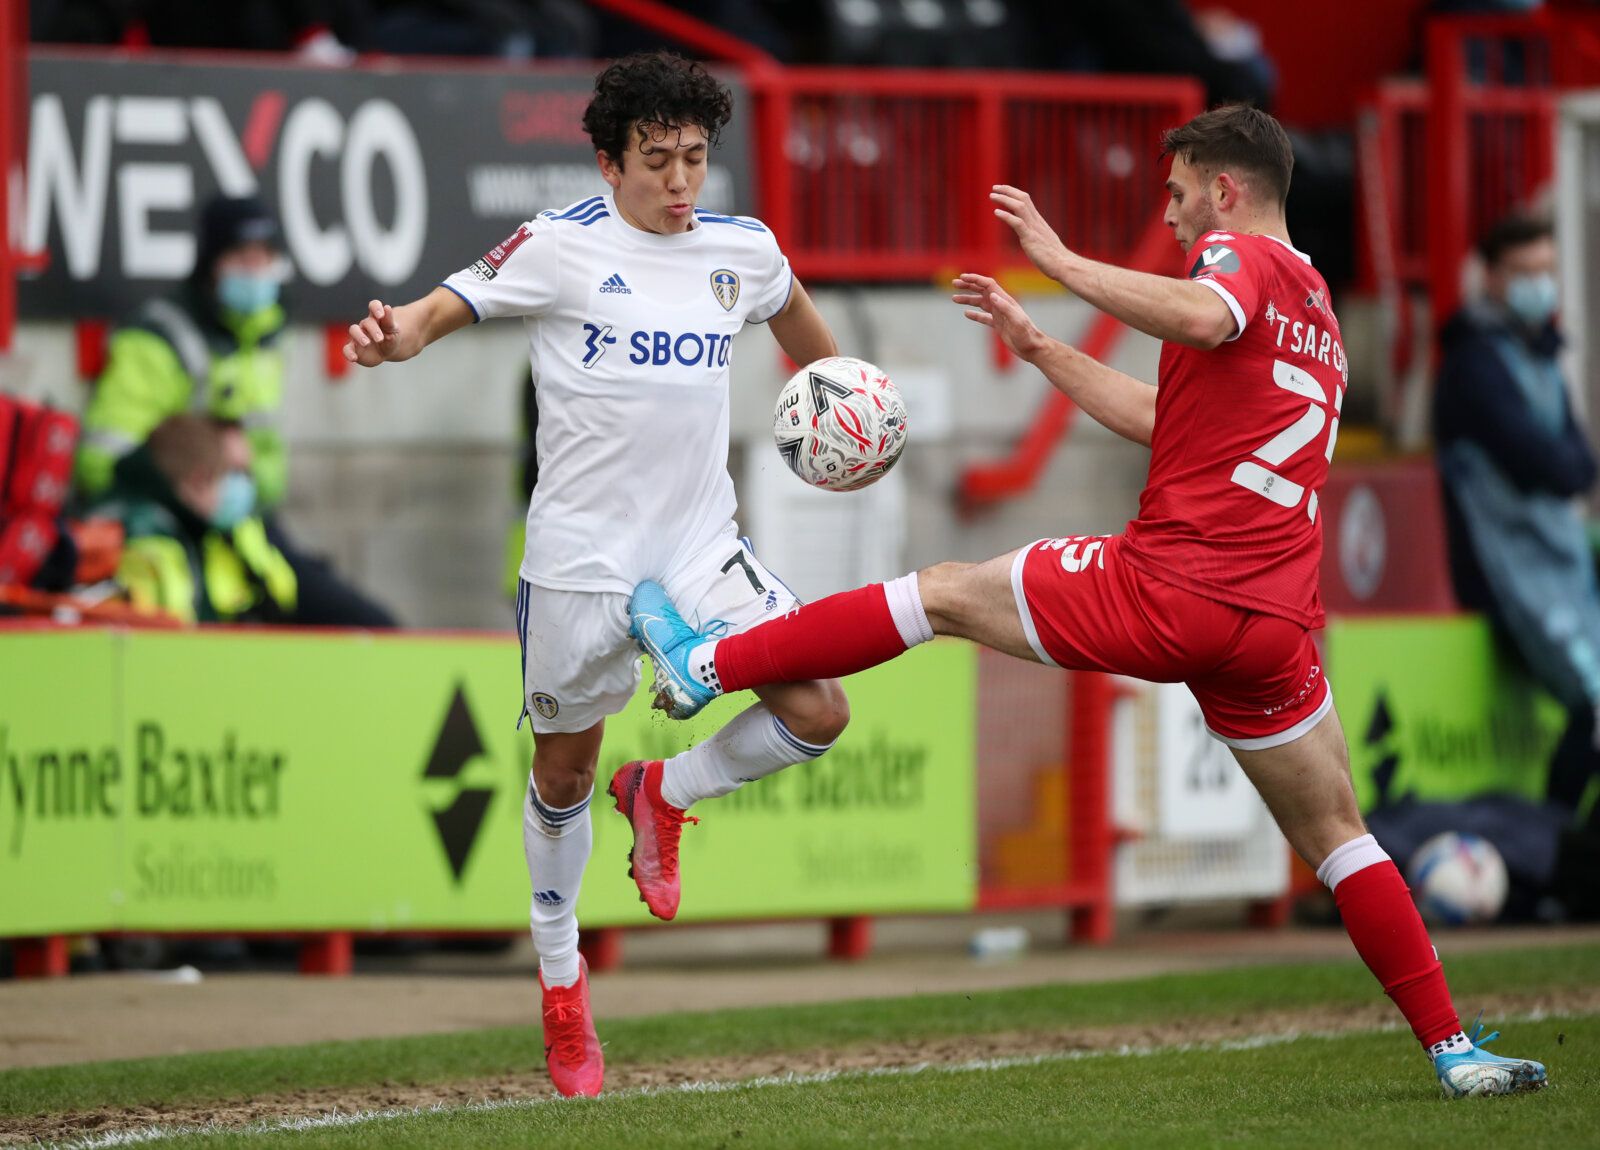 Soccer Football - FA Cup - Third Round - Crawley Town v Leeds United - The People's Pension Stadium, Crawley, Britain - January 10, 2021 Crawley Town's Nicholas Tsaroulla in action with Leeds United's Ian Poveda Action Images via Reuters/Peter Cziborra